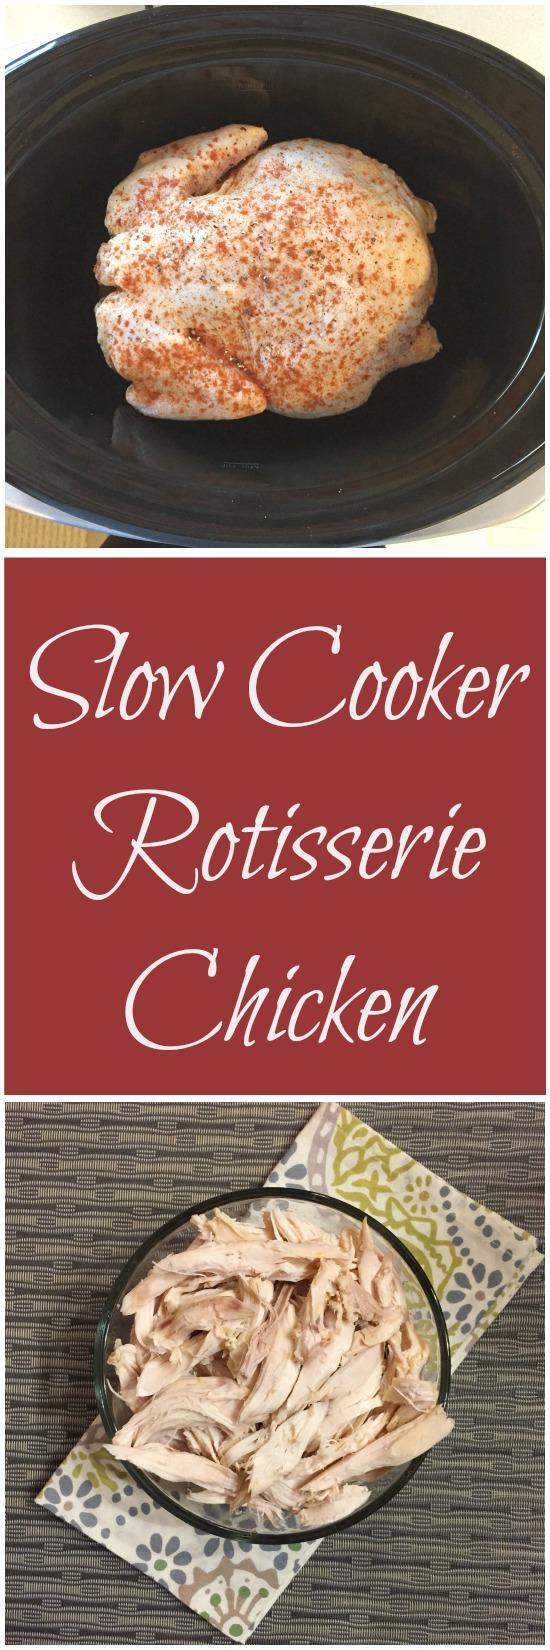 Did you know you can make a rotisserie-style chicken in your crockpot? It's an inexpensive, easy way to prep chicken you can use in a variety of other recipes!